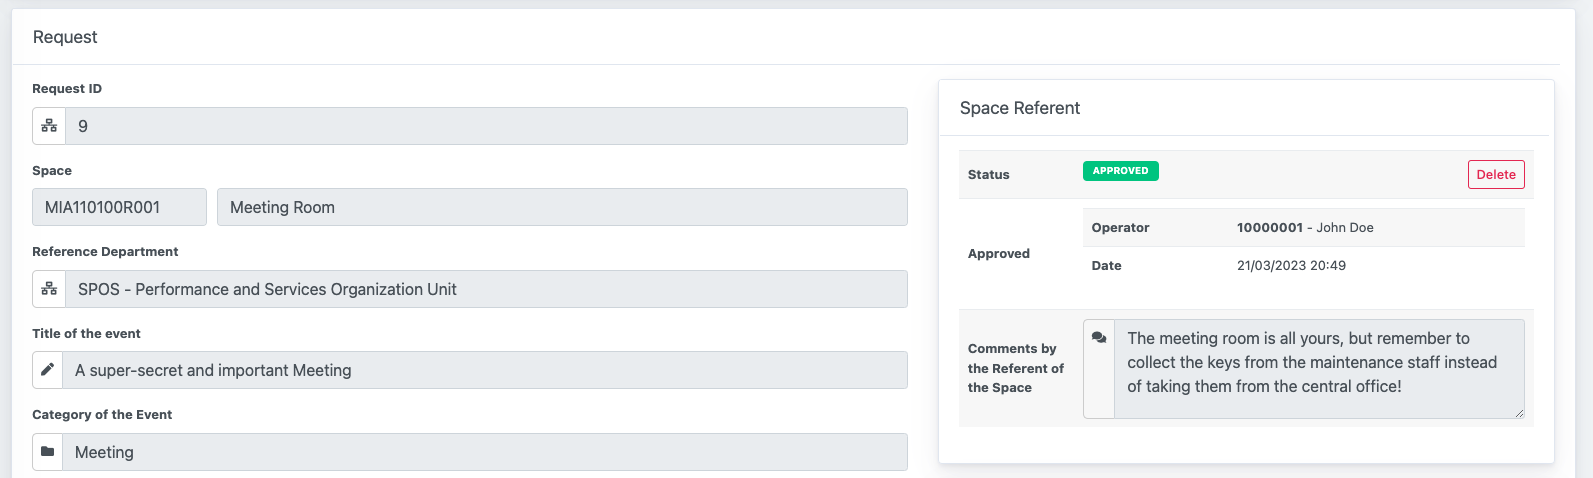 Spaces and resources Reservation - Space Referent feedback